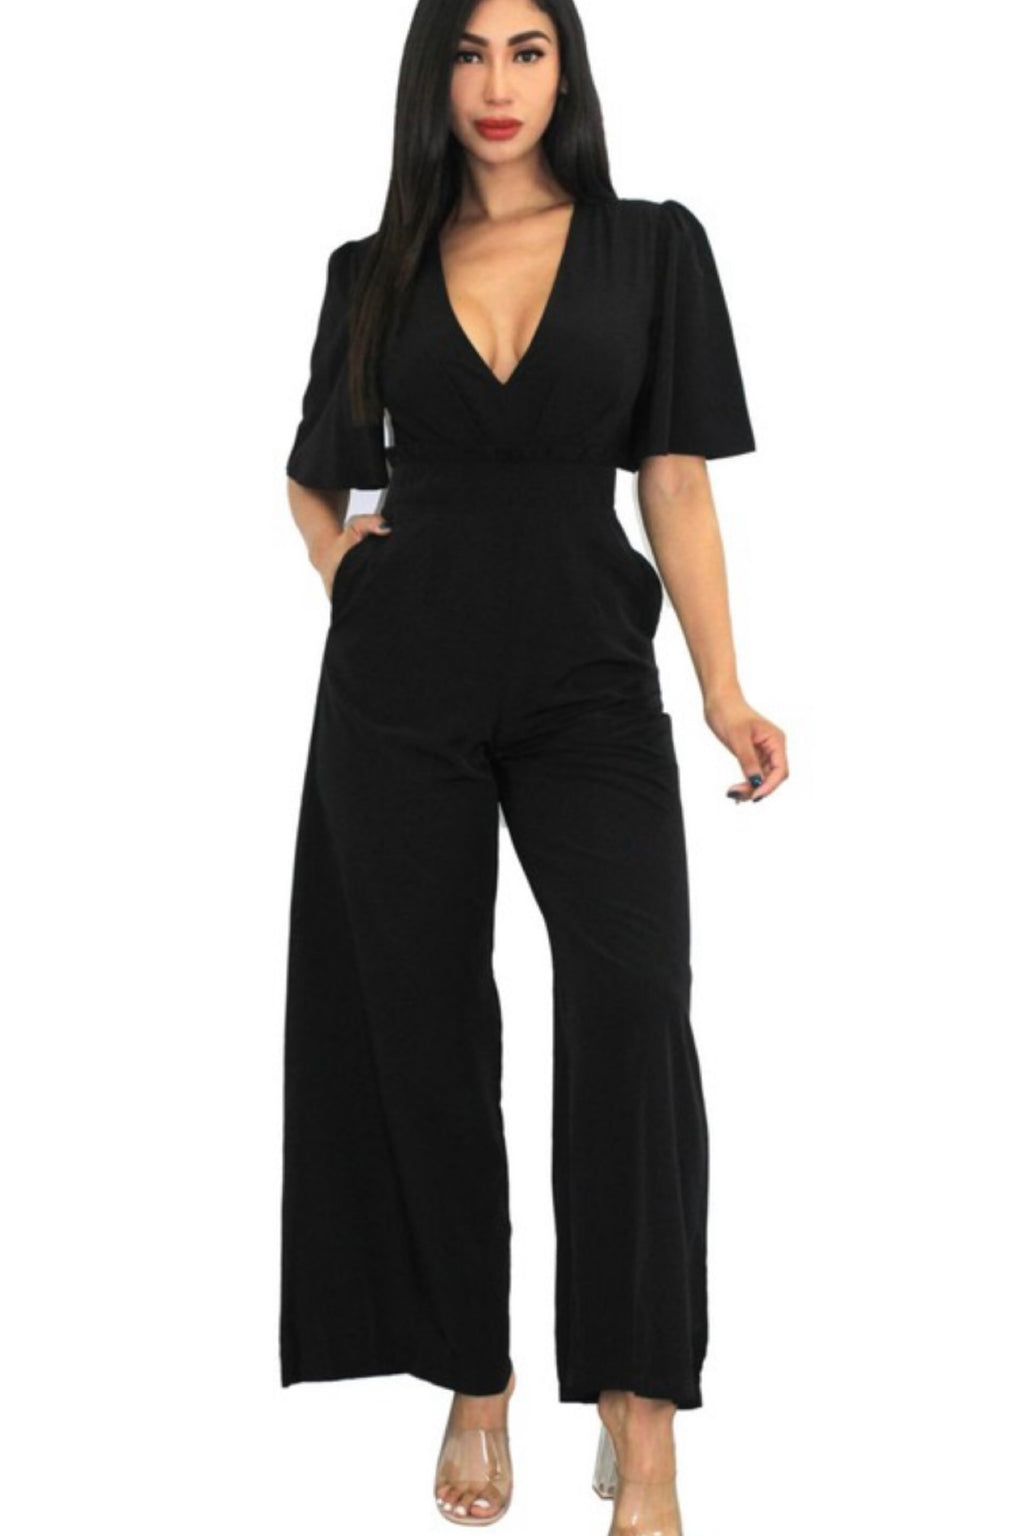 CASUAL CHIC JUMPSUIT